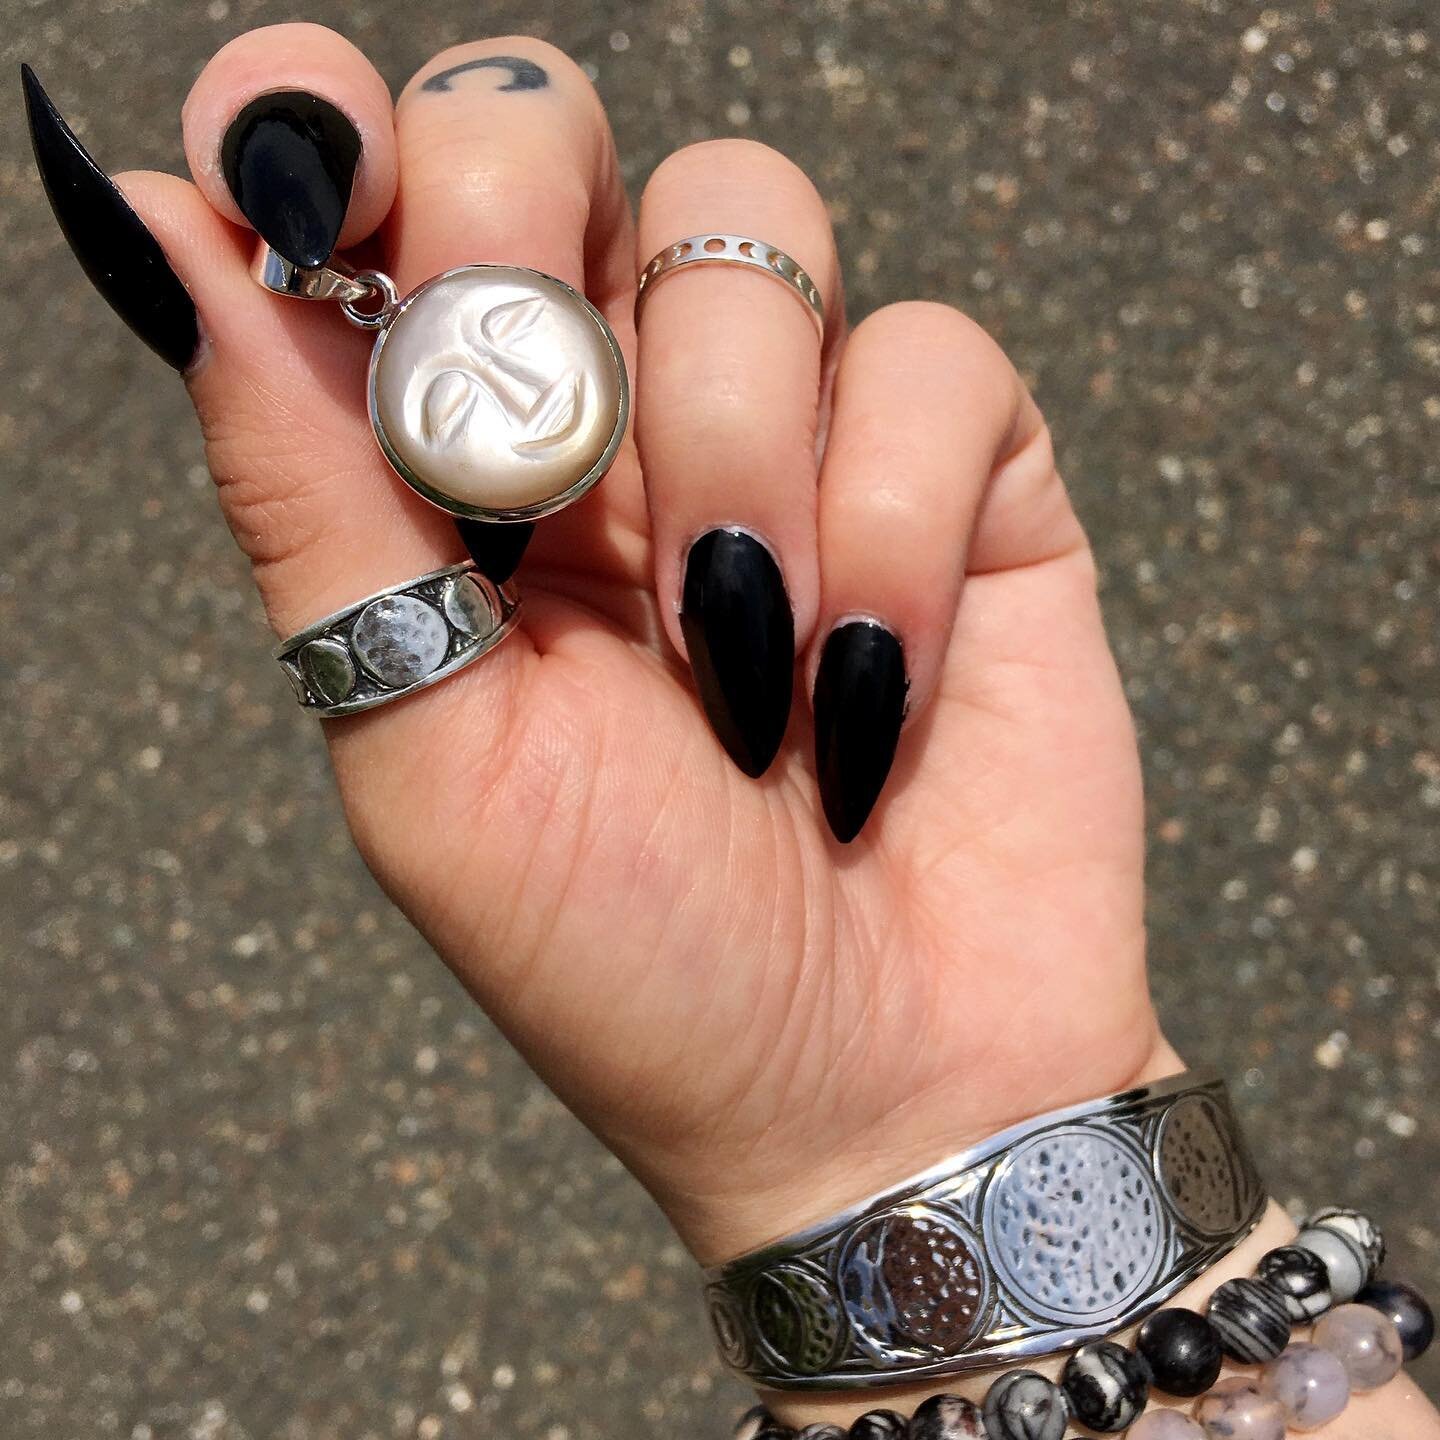 Happy National Moon Day! 🌙

We are in Salem celebrating the day in which we first landed on the moon 52 years ago 🚀

Multiple Pieces &amp; Sizes Available!
🌜Thumb Moon Phase Ring: $40
🌝 Moon Phase on Midi: $15
🌜 Moon Phase Cuff: $200
🌝 Moonston